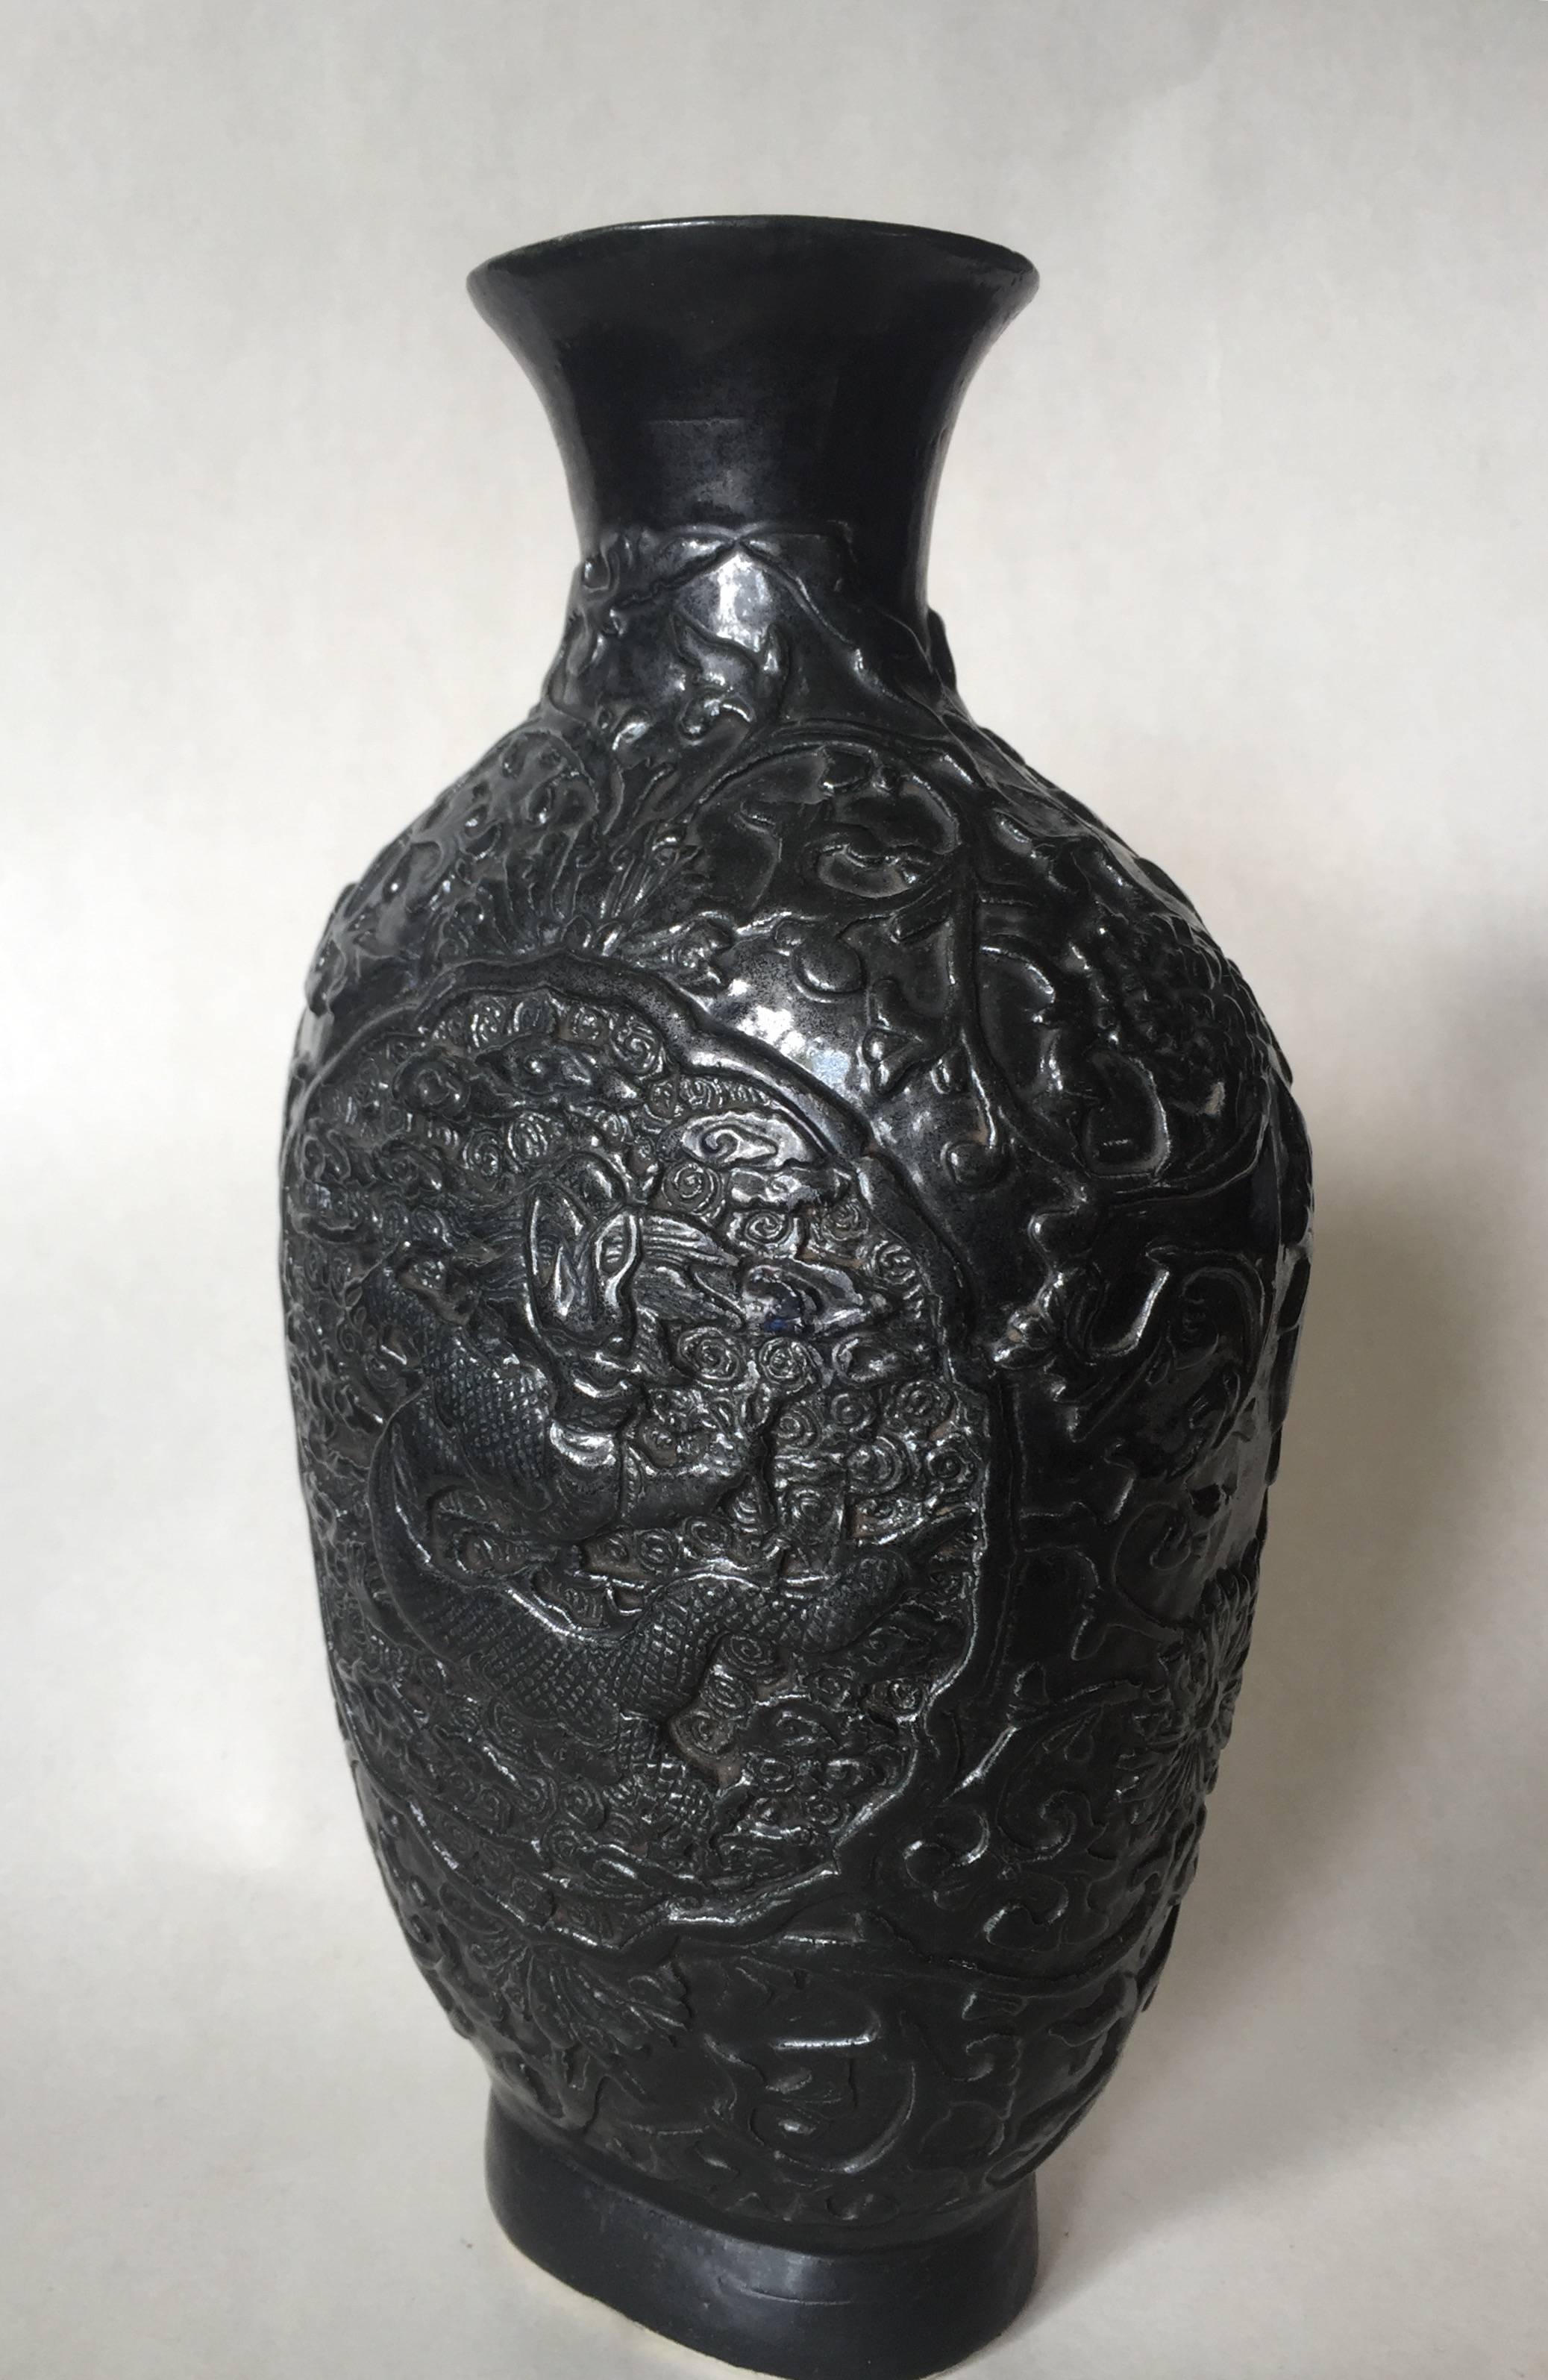 Late 19th century Chinese Qianlong mark Bisque relief dragon vase.
The relief decor imitation bronze is full of scrolls of leaf, chrysanthemum flowers among the Dragon cartouches in the middle of each side of the vase.
This vase has been used as a